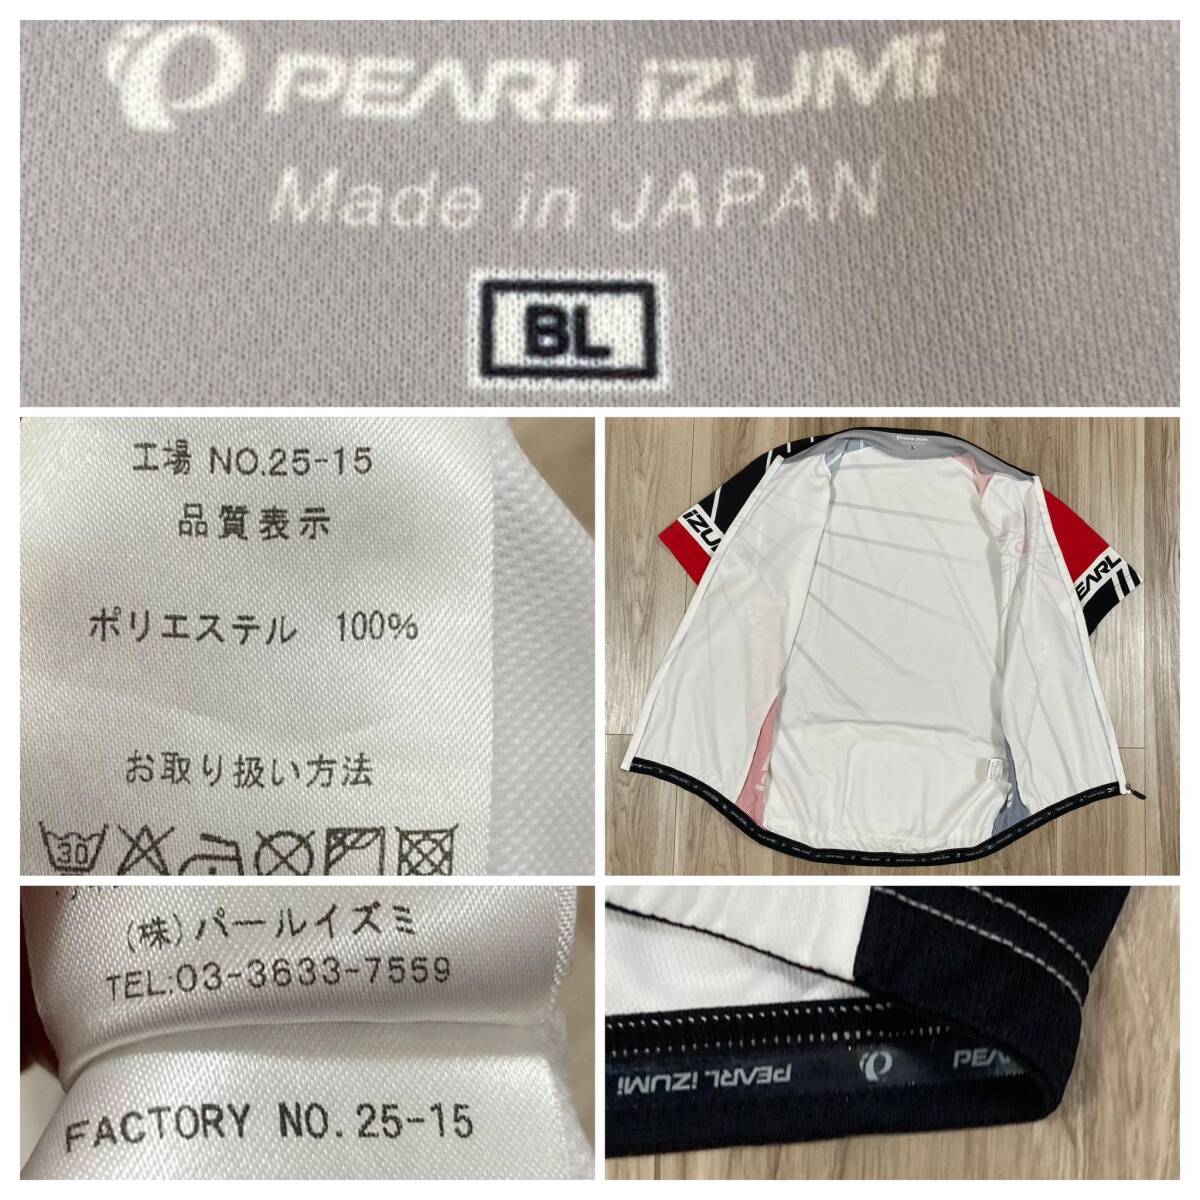  free shipping * pearl izmiBL ( wide width L) men's short sleeves cycle jersey made in Japan PEARL IZUMI both side mesh series good quality goods n22 white × red × black 